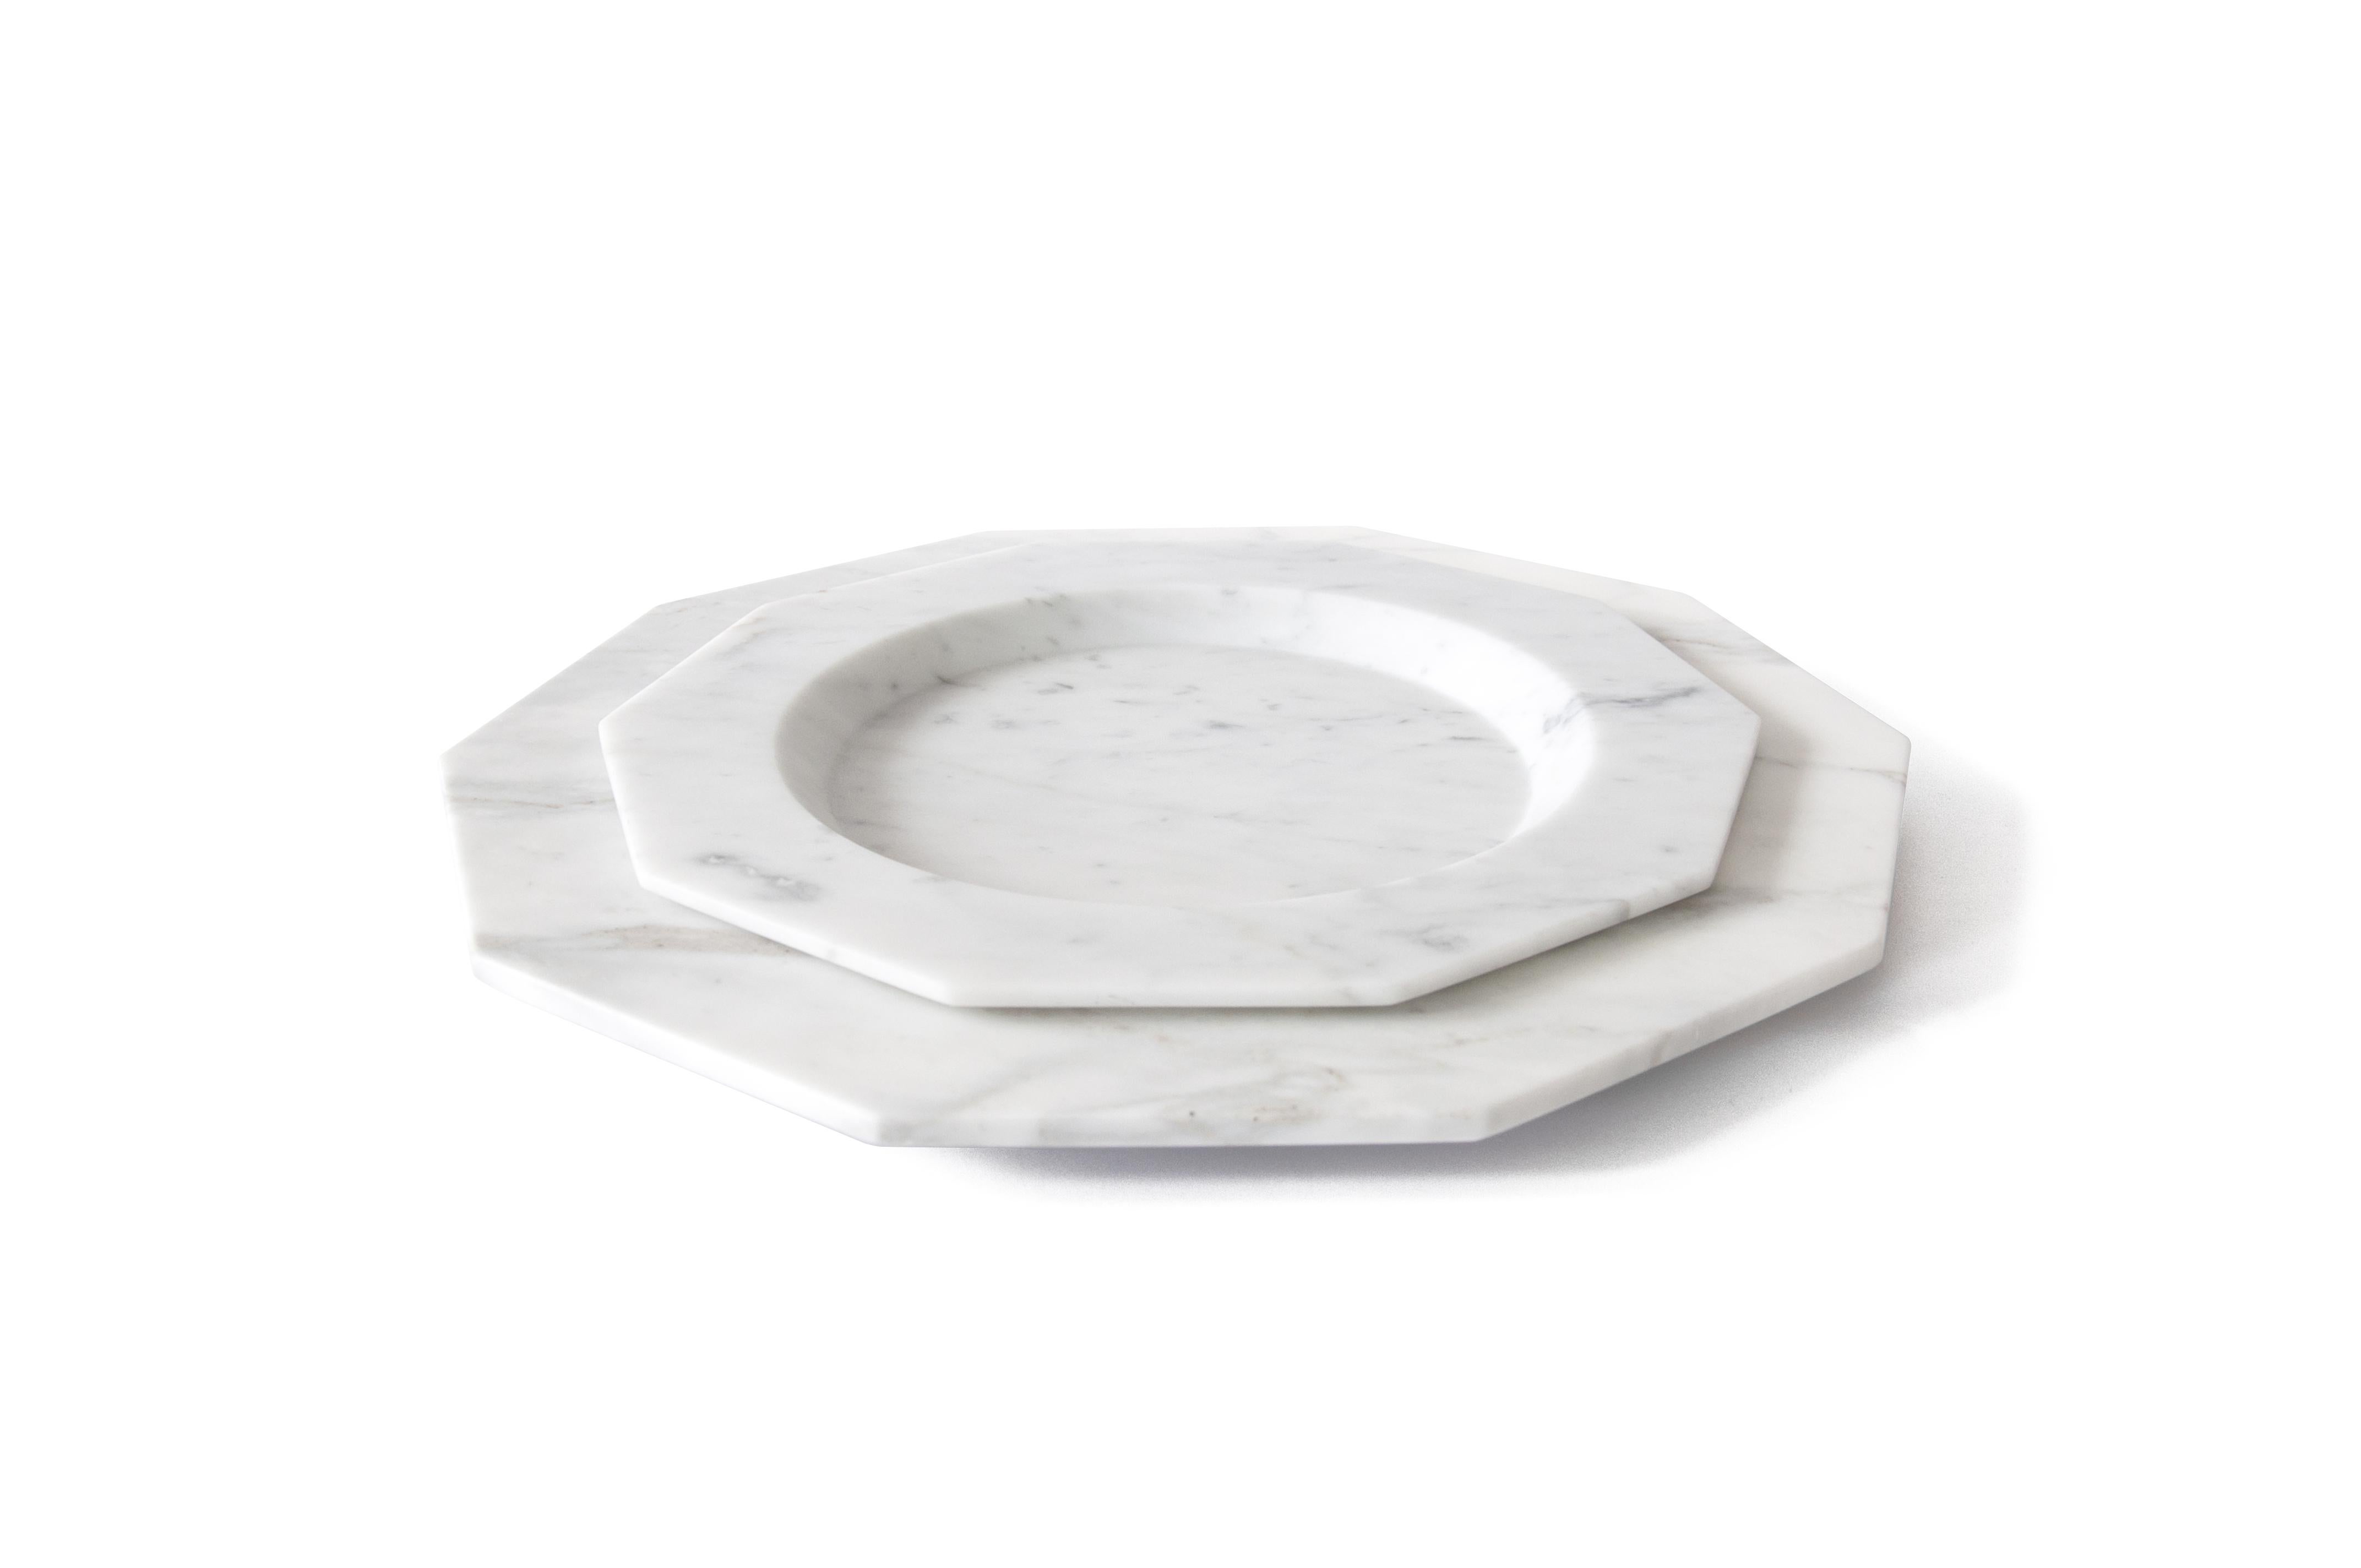 Big dinner plate in satin Arabescato marble.

Each piece is in a way unique (every marble block is different in veins and shades) and handmade by Italian artisans specialized over generations in processing marble. Slight variations in shape, color